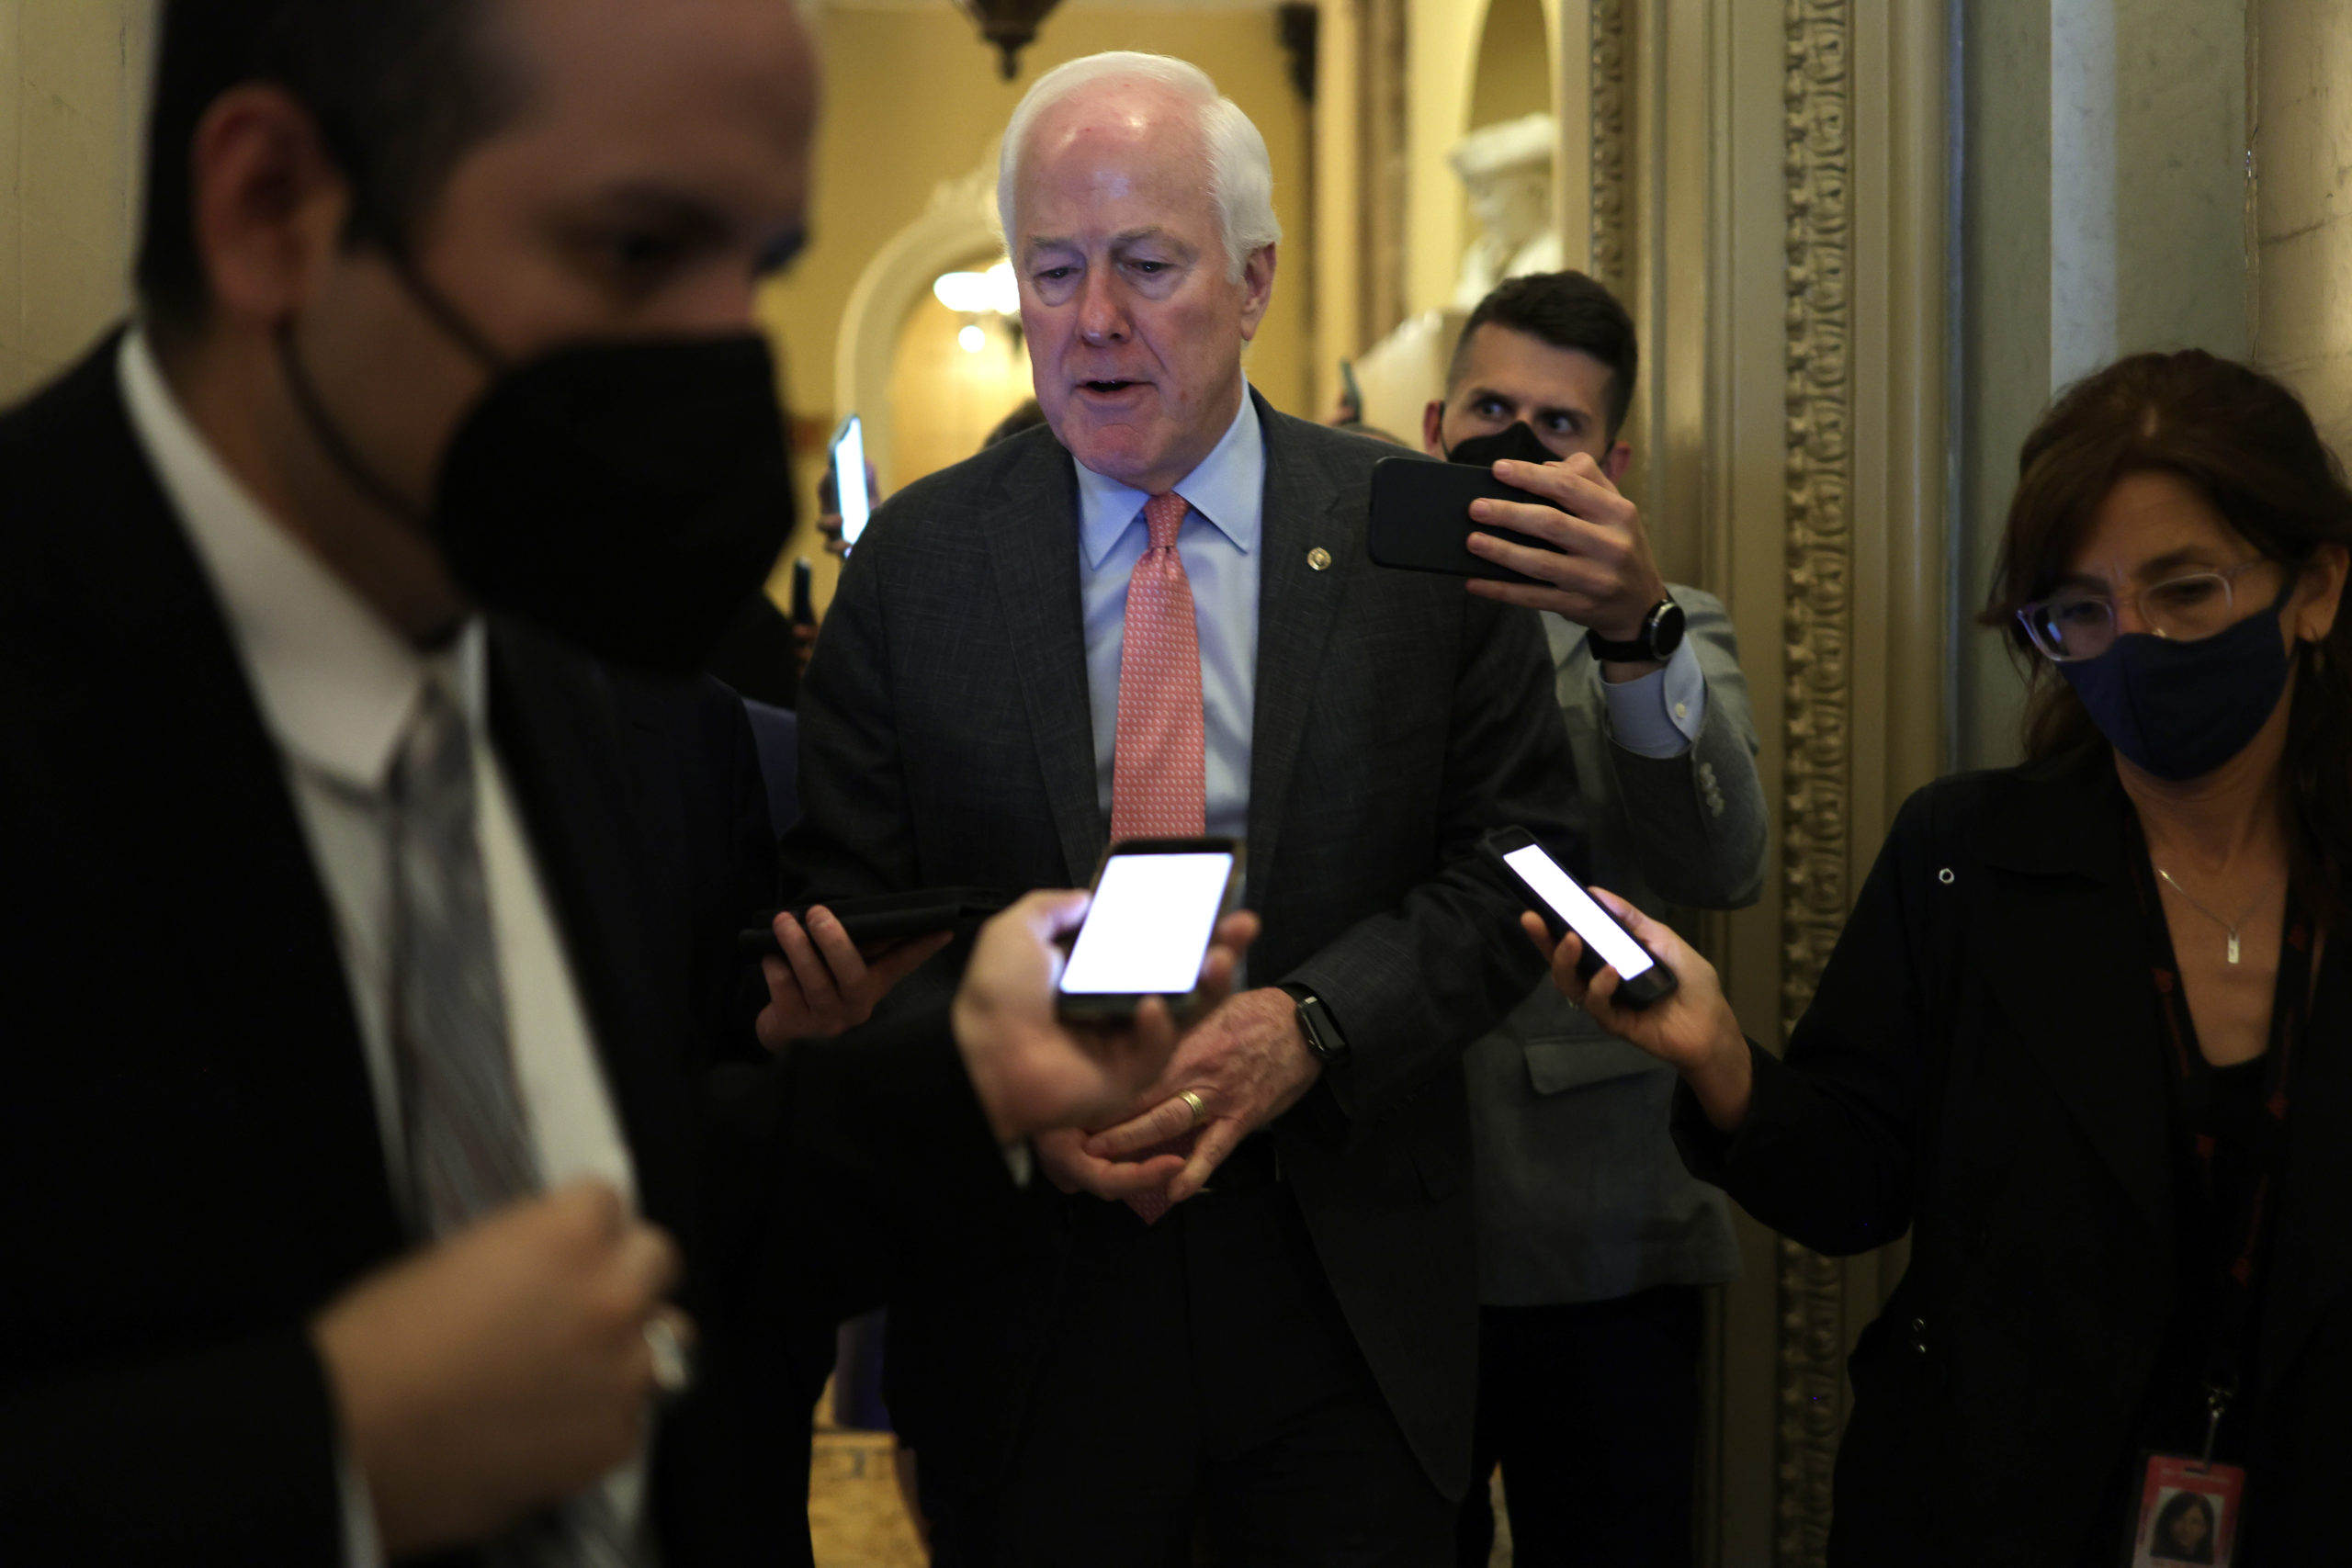 U.S. Sen. John Cornyn (R-TX) speaks to members of the press at the U.S. Capitol June 6, 2022 in Washington, DC.(Photo by Alex Wong/Getty Images)